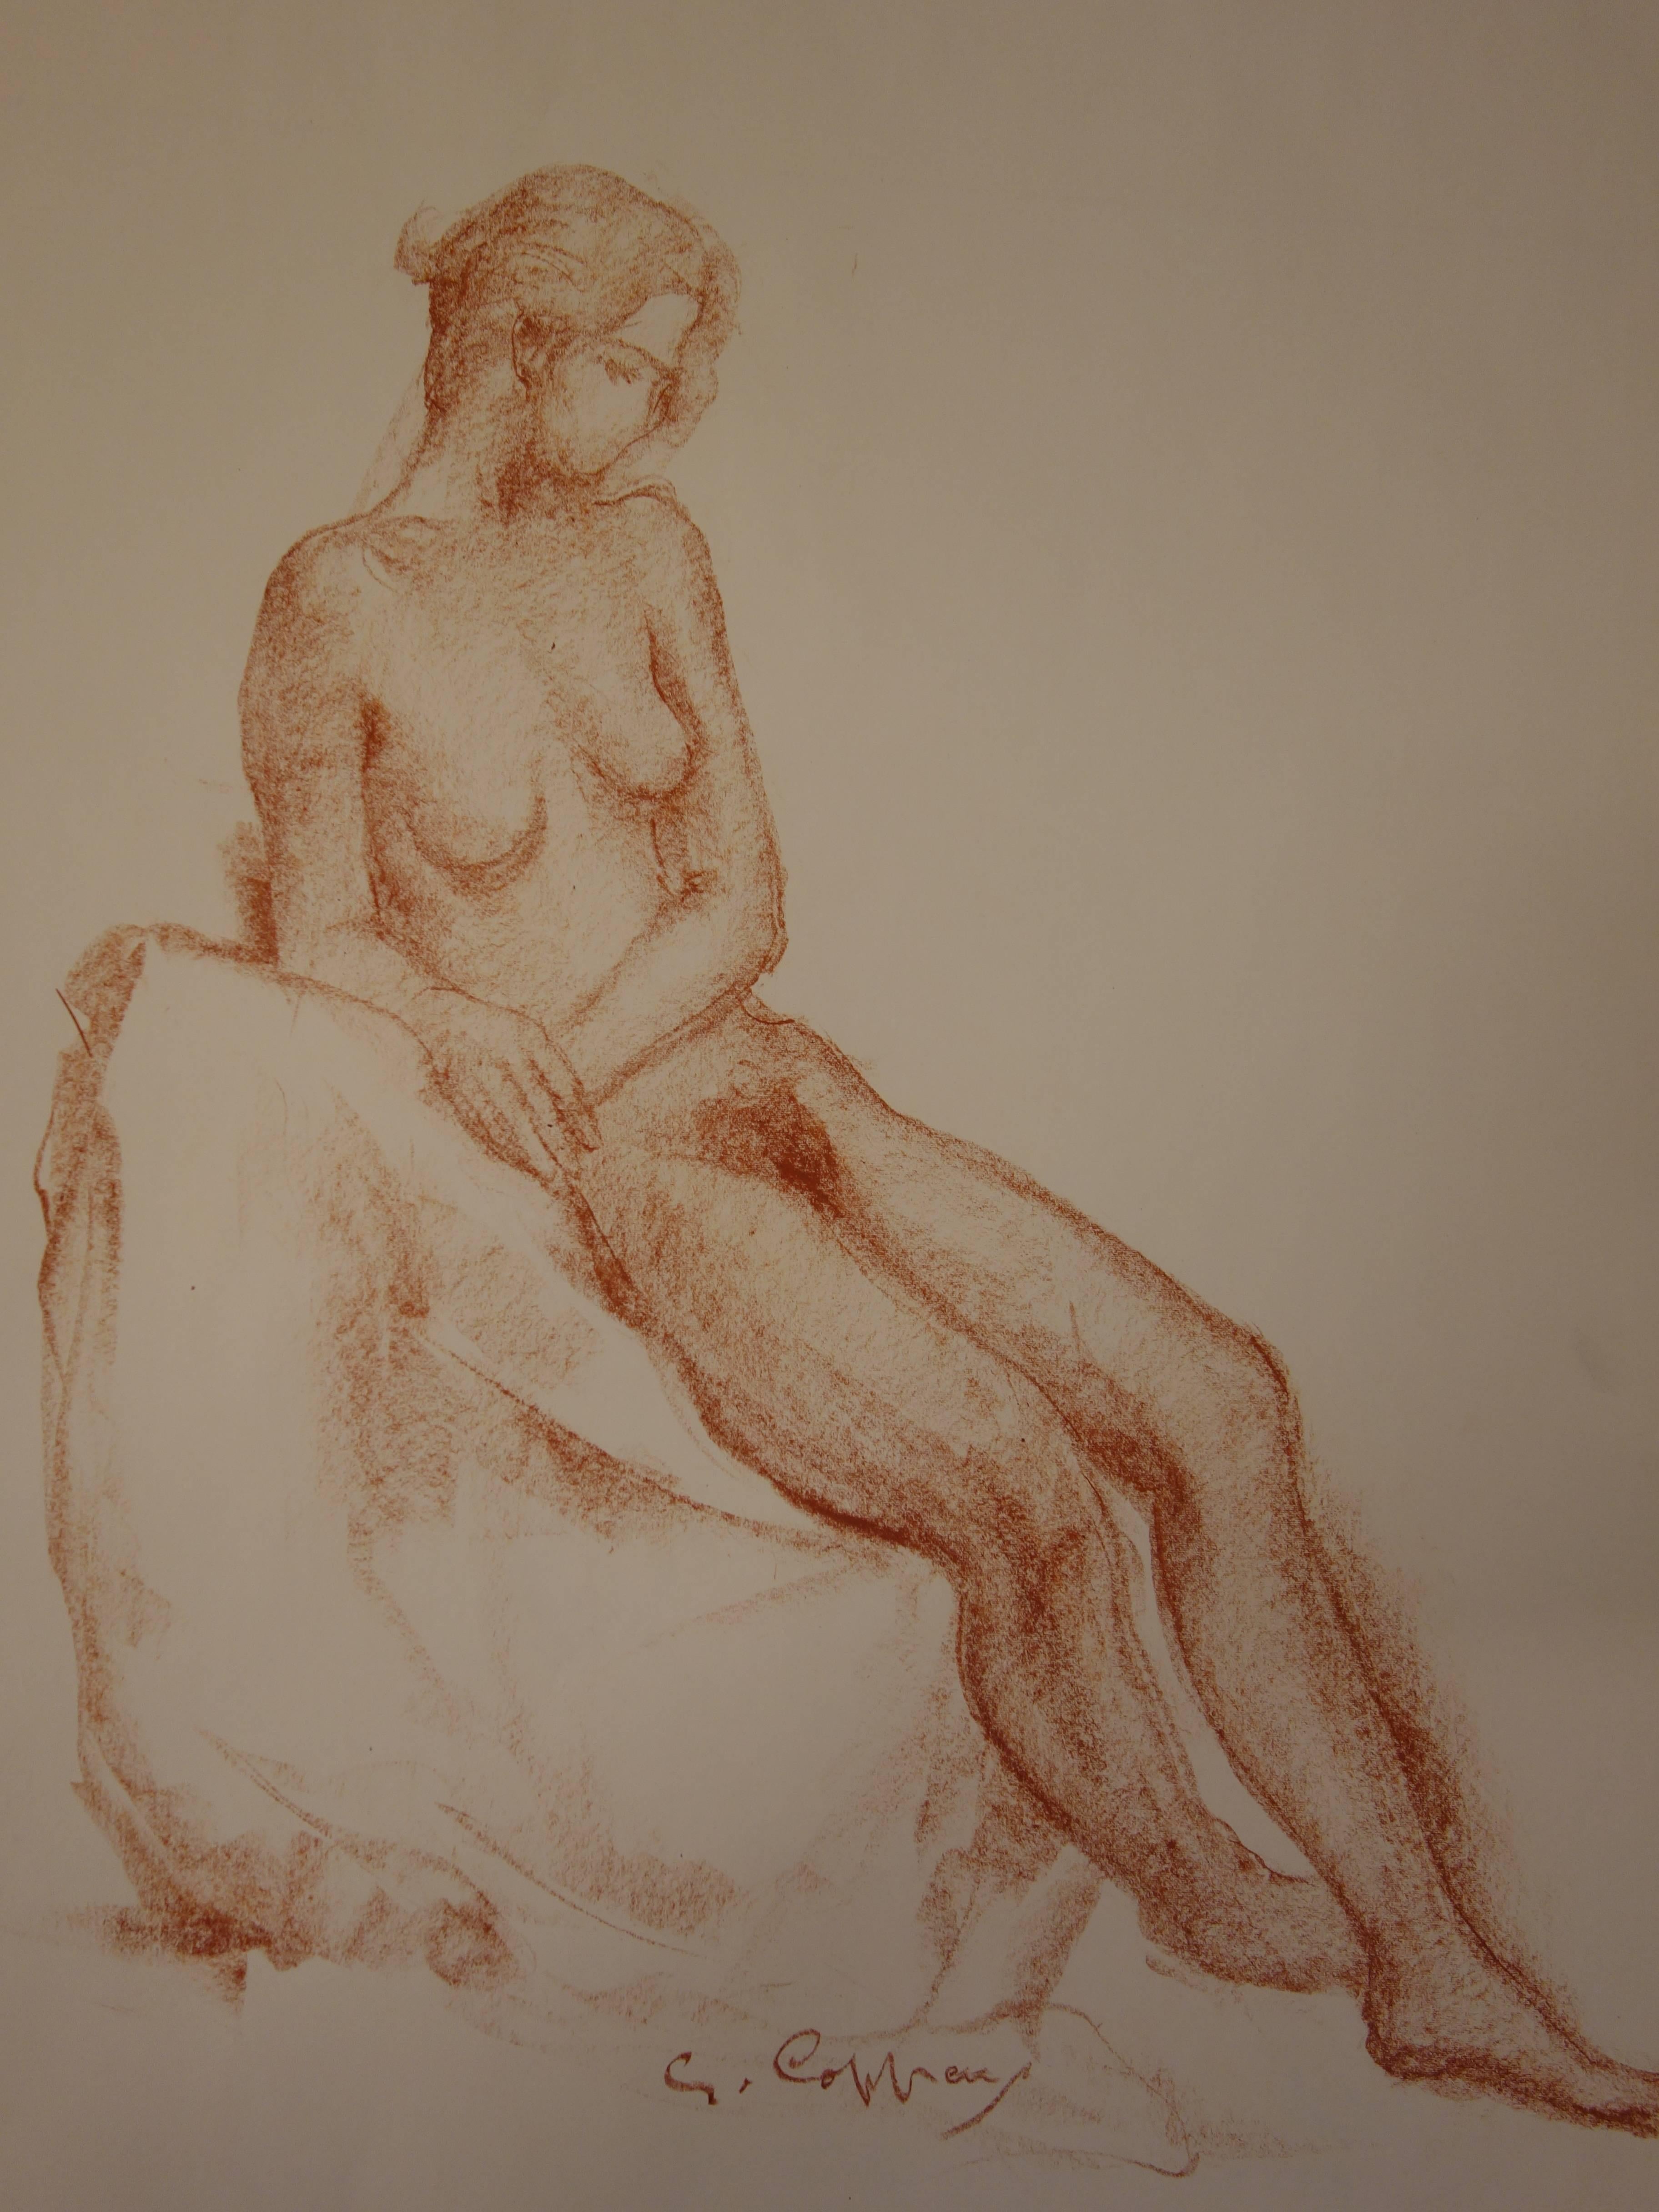 Gaston COPPENS (1909 - 2002)
Nude Study in Sanguine

Original charcoal drawing
Signed in the bottom right
Stamp of the artist on the back
On drawing paper 52 x 43 cm (c 21 x 17 inch)

Excellent condition

Gaston Coppens studied sculpture in the